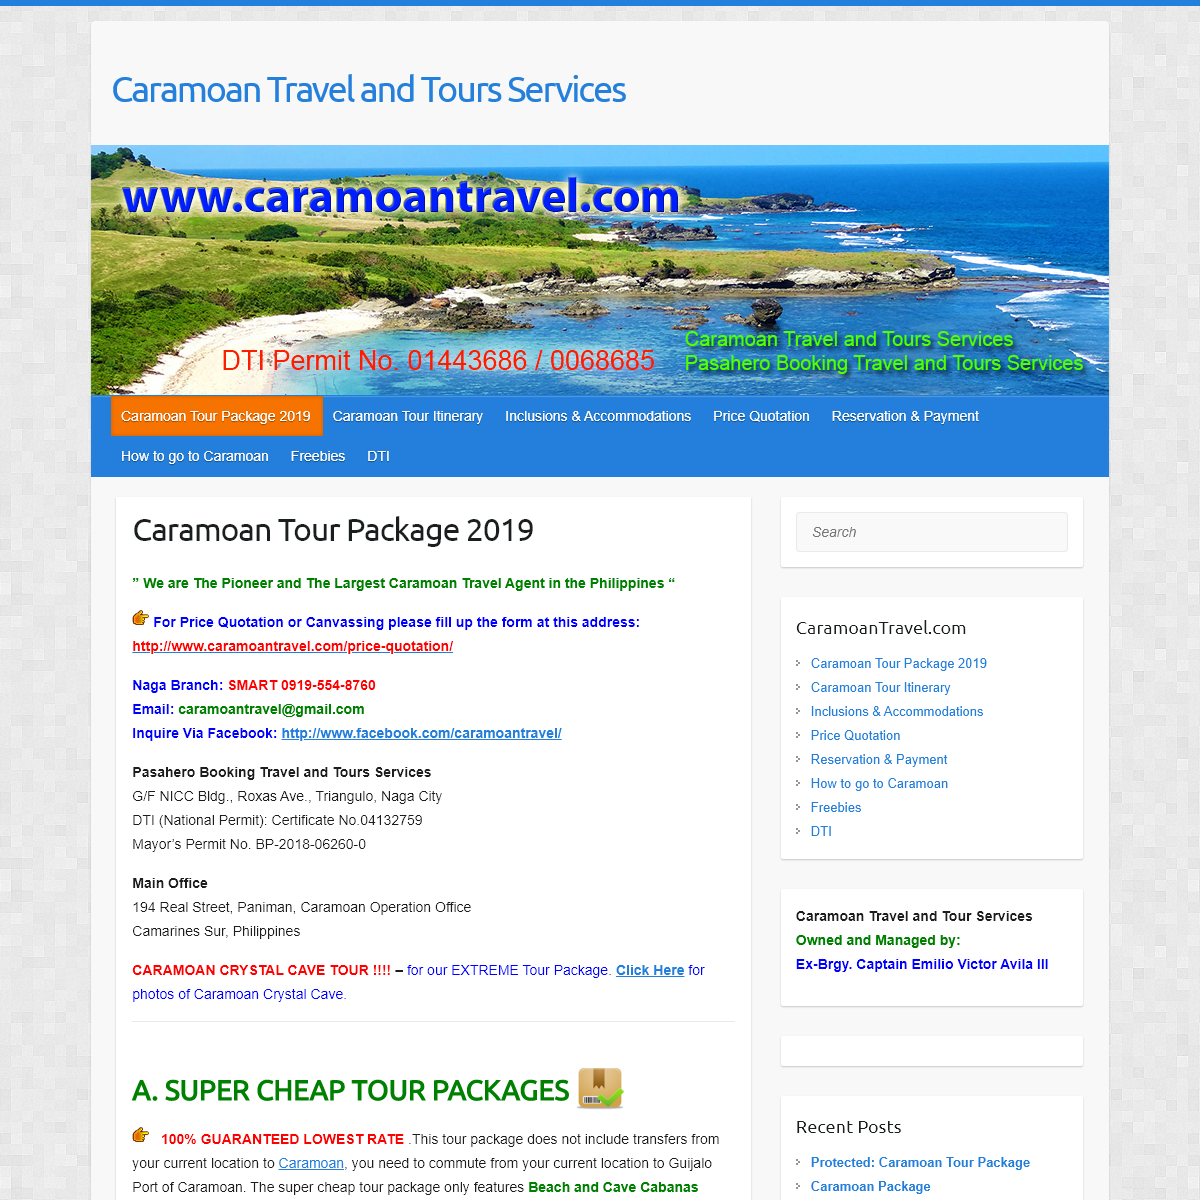 A complete backup of caramoantravel.com